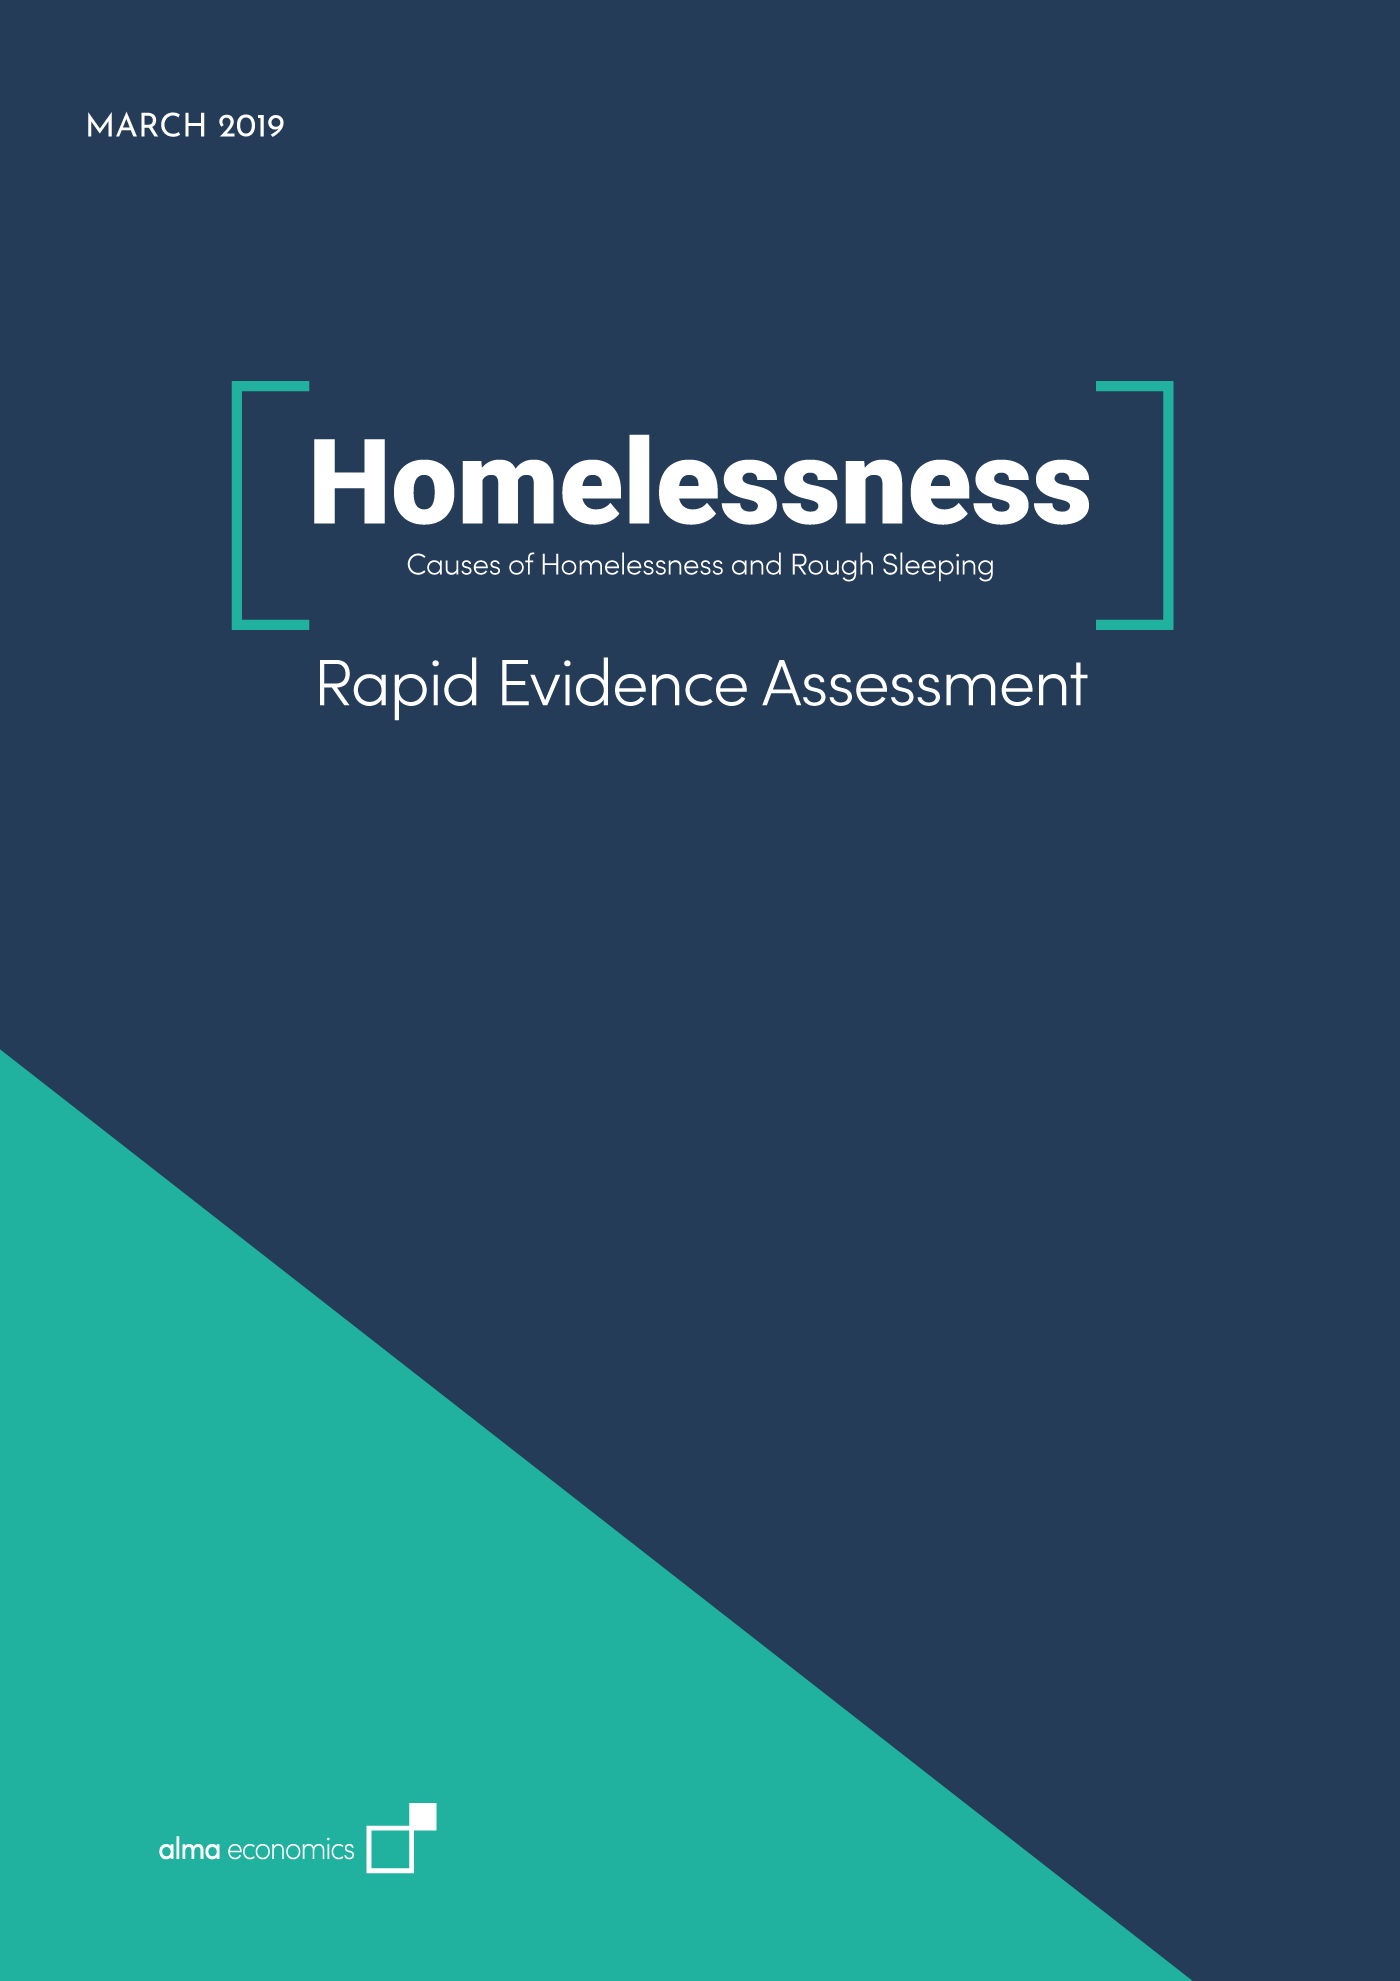 Cover-Homelessness-01.png